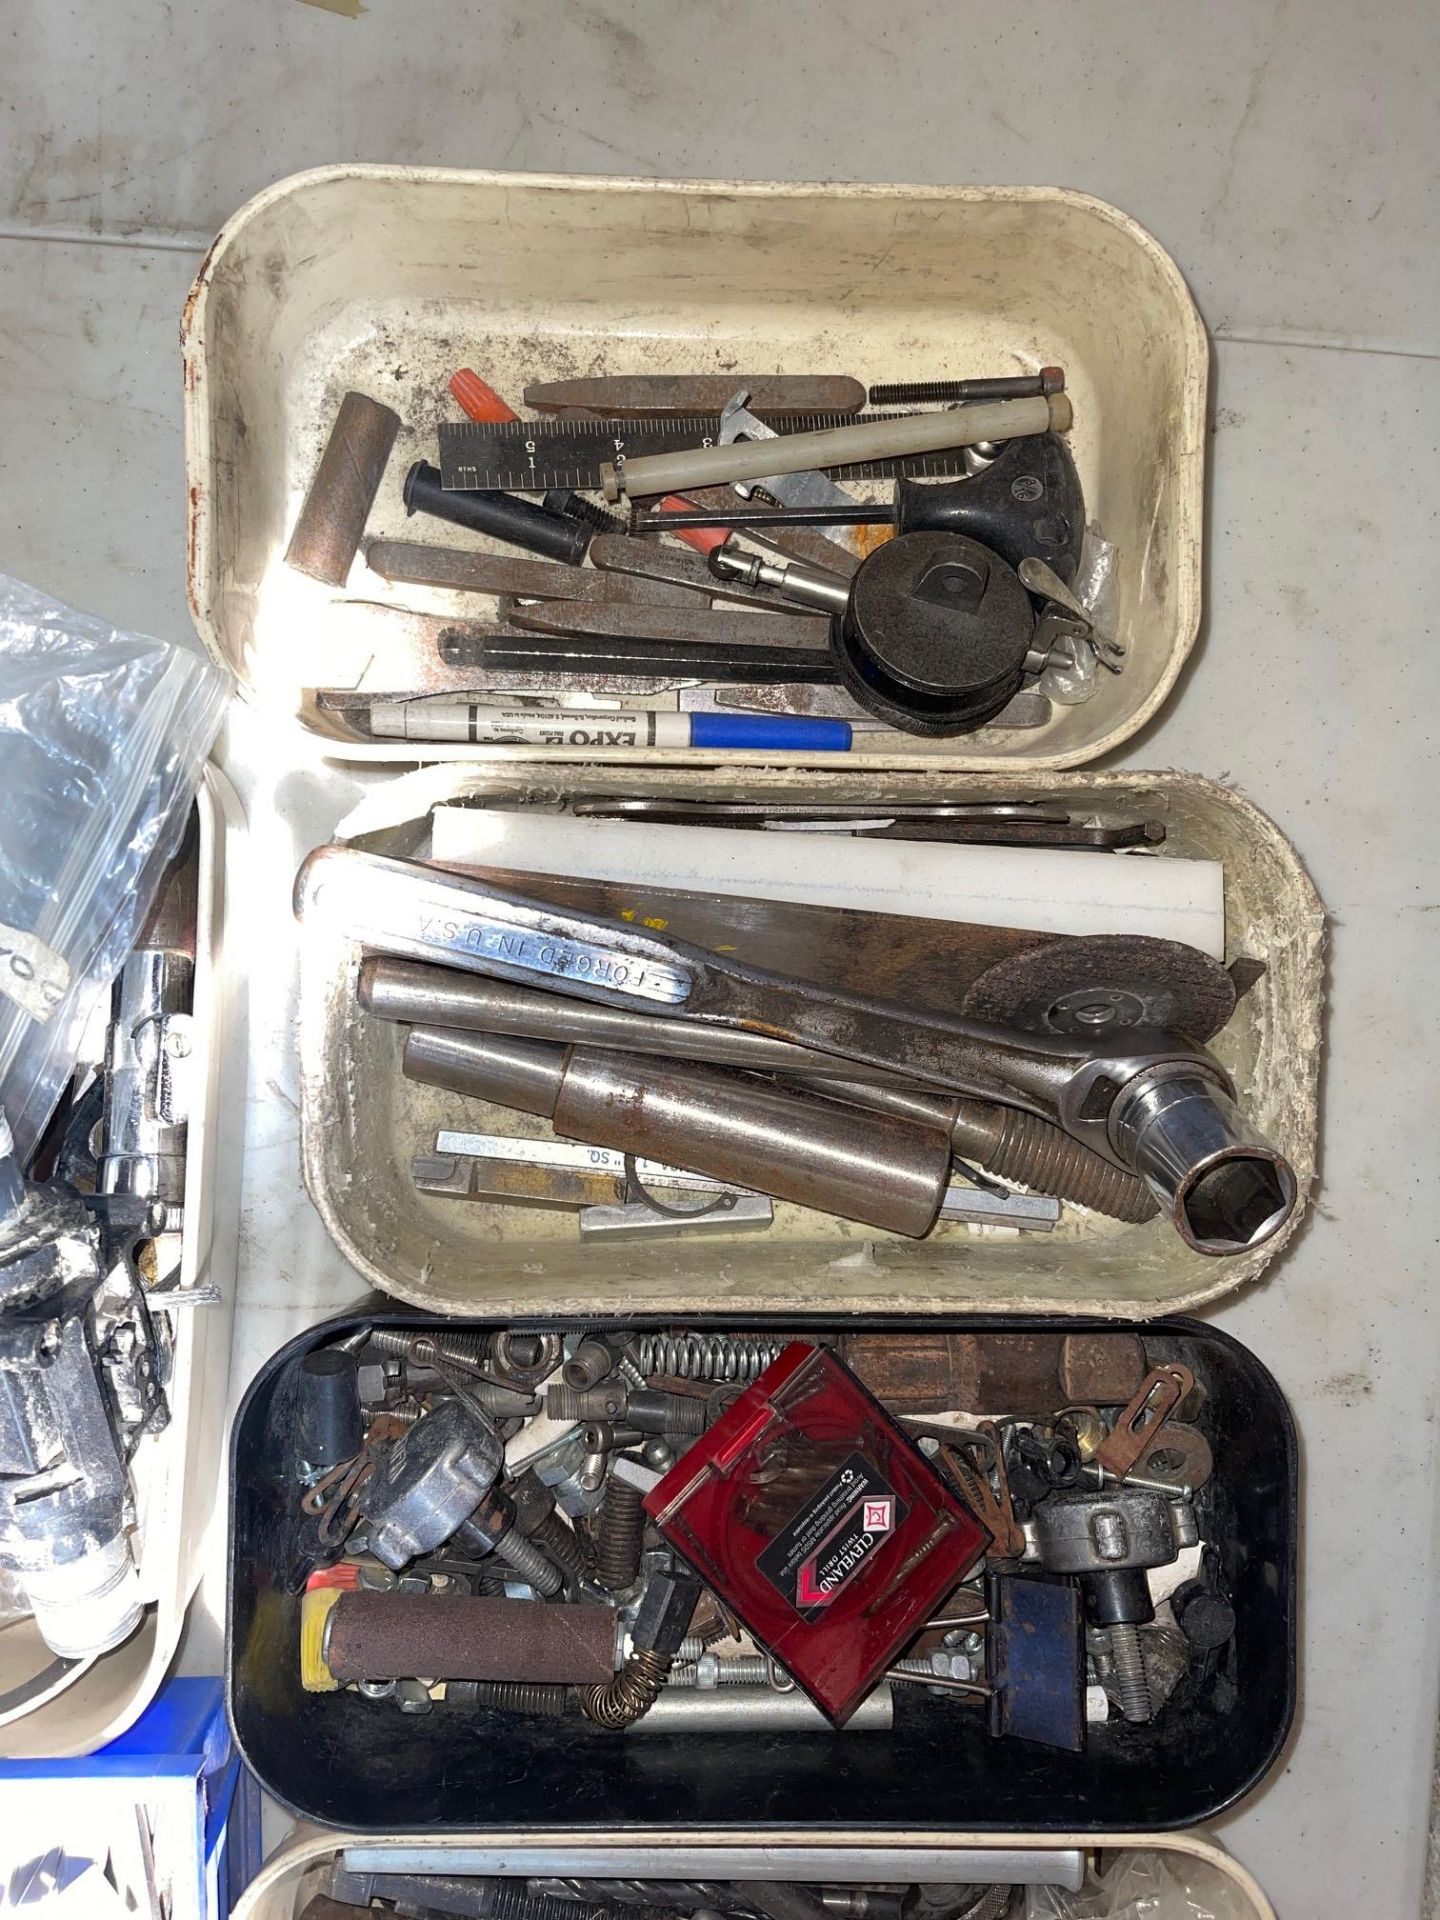 LOT/ MISC TOOLS, BITS, CUTTERS, ALUMINUM, COPPER, BRASS, STAINLESS STEEL PCS, GAUGES - Image 2 of 2